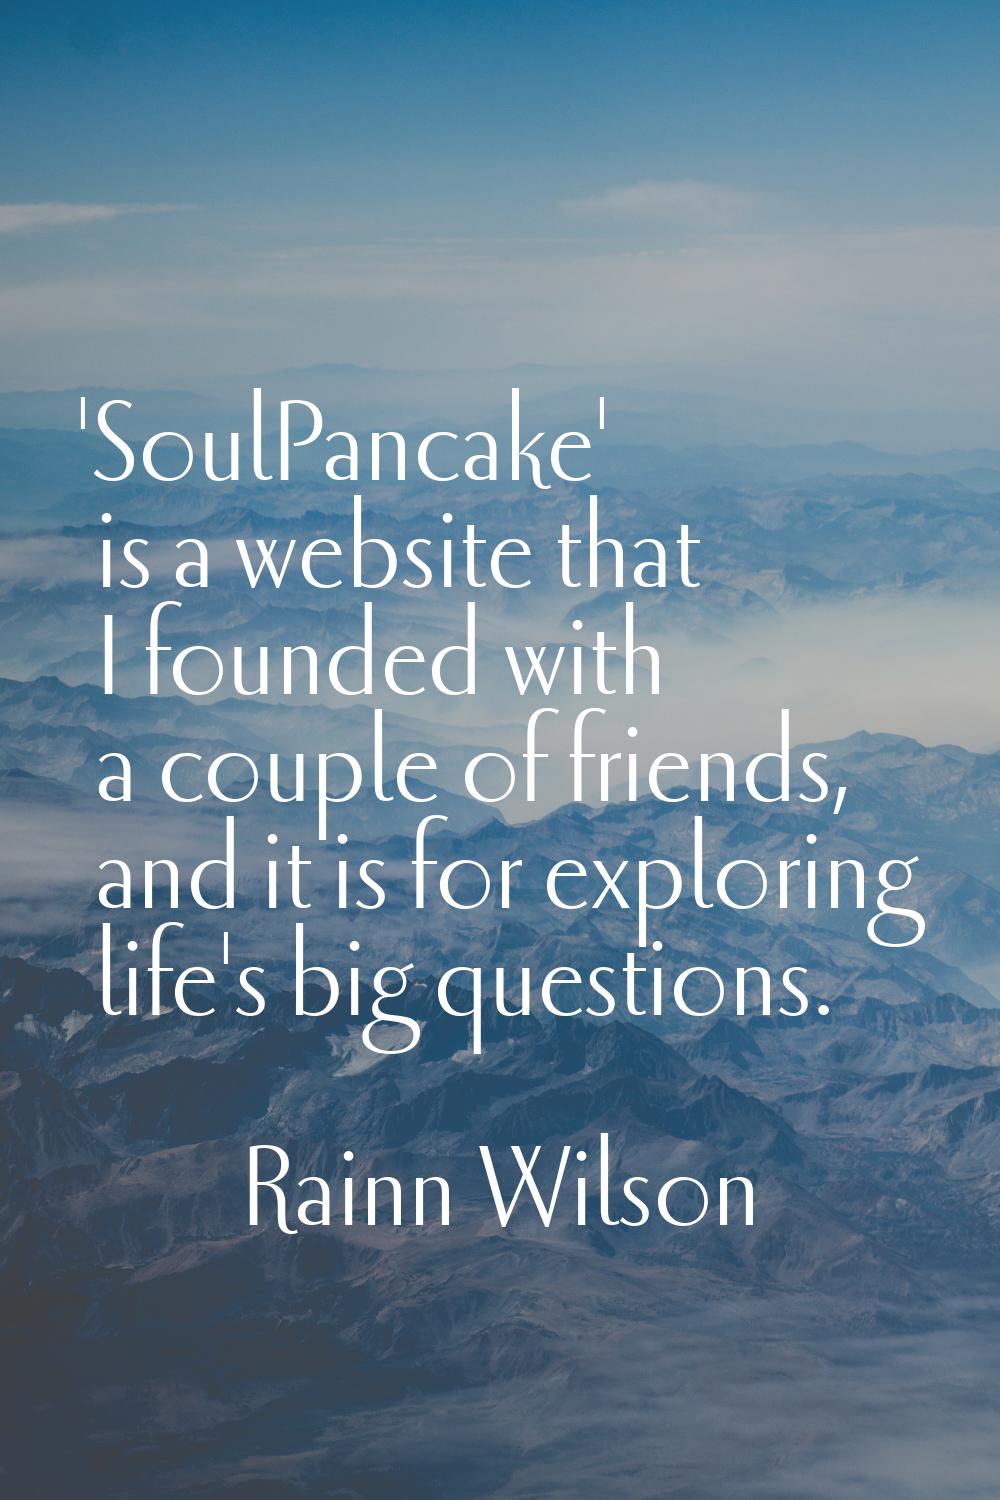 'SoulPancake' is a website that I founded with a couple of friends, and it is for exploring life's 